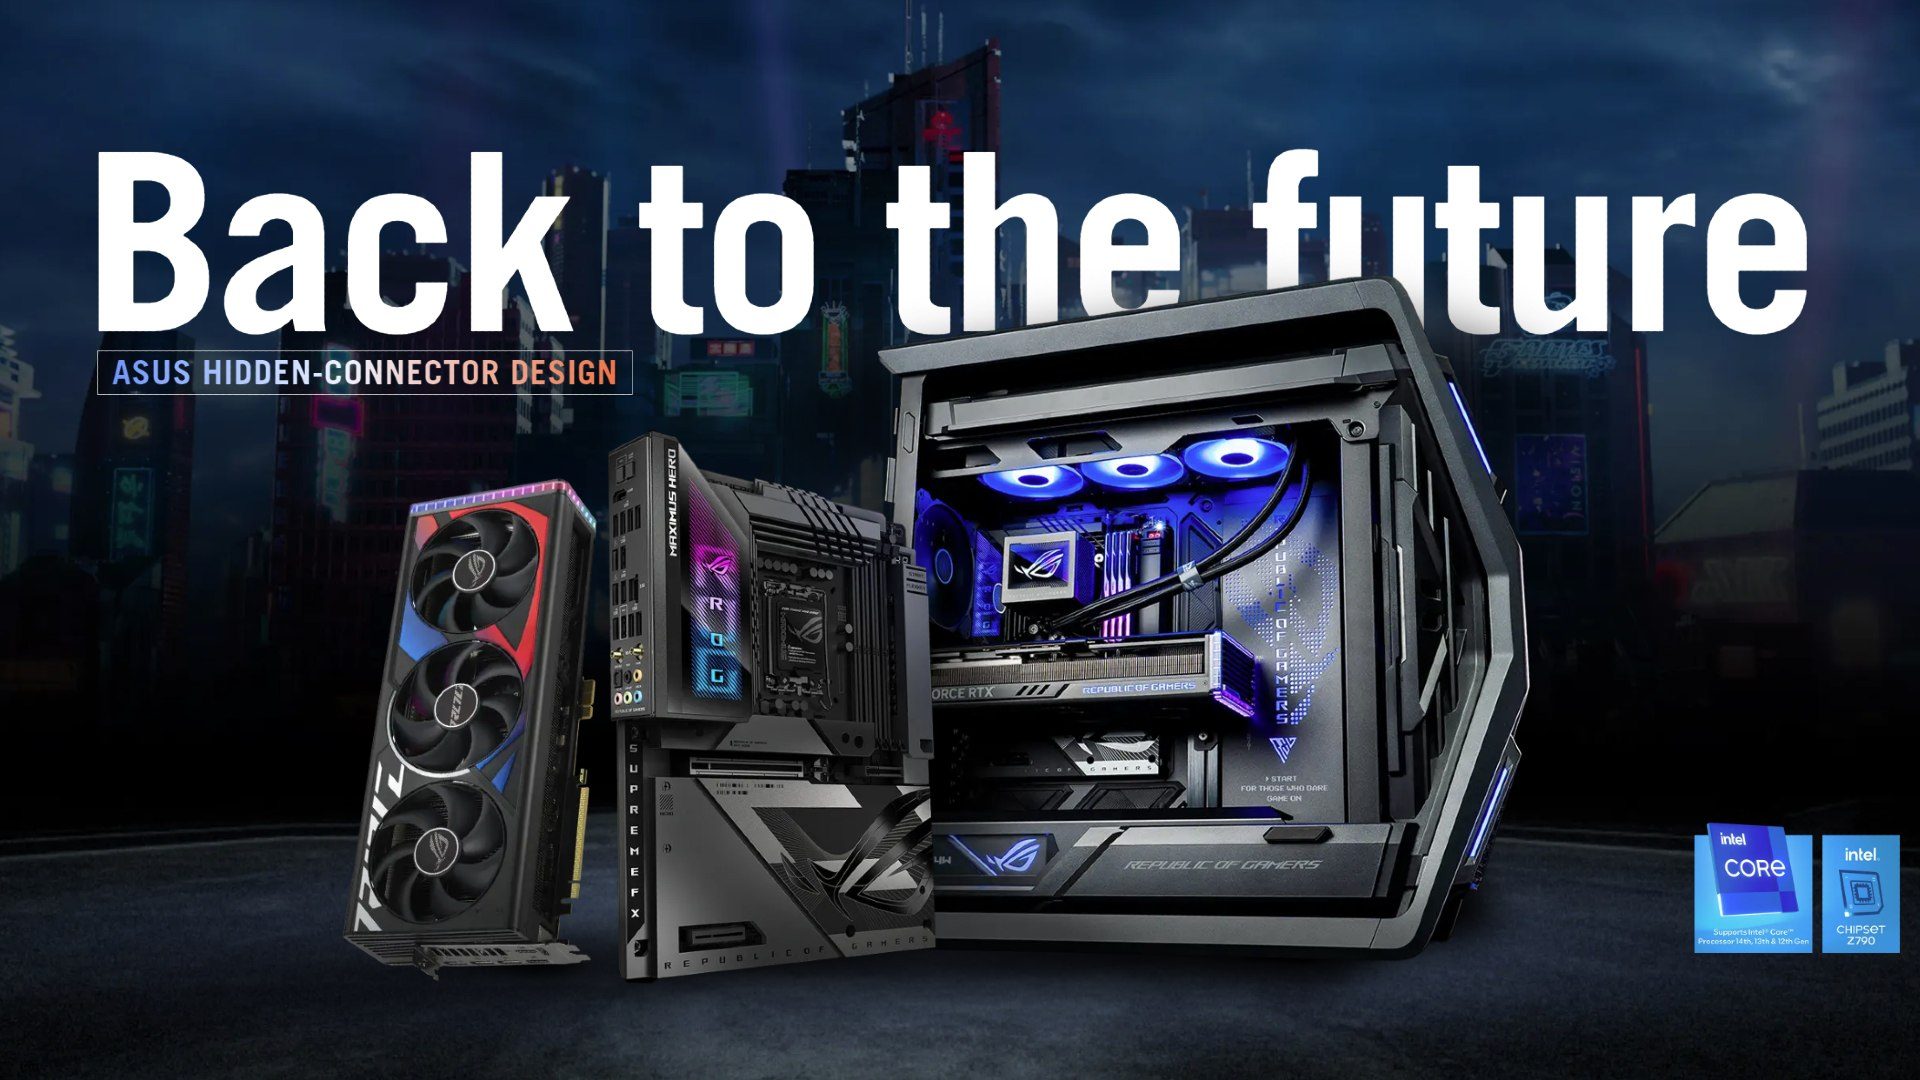 Asus BTF Serie mit Text "Back to the future"